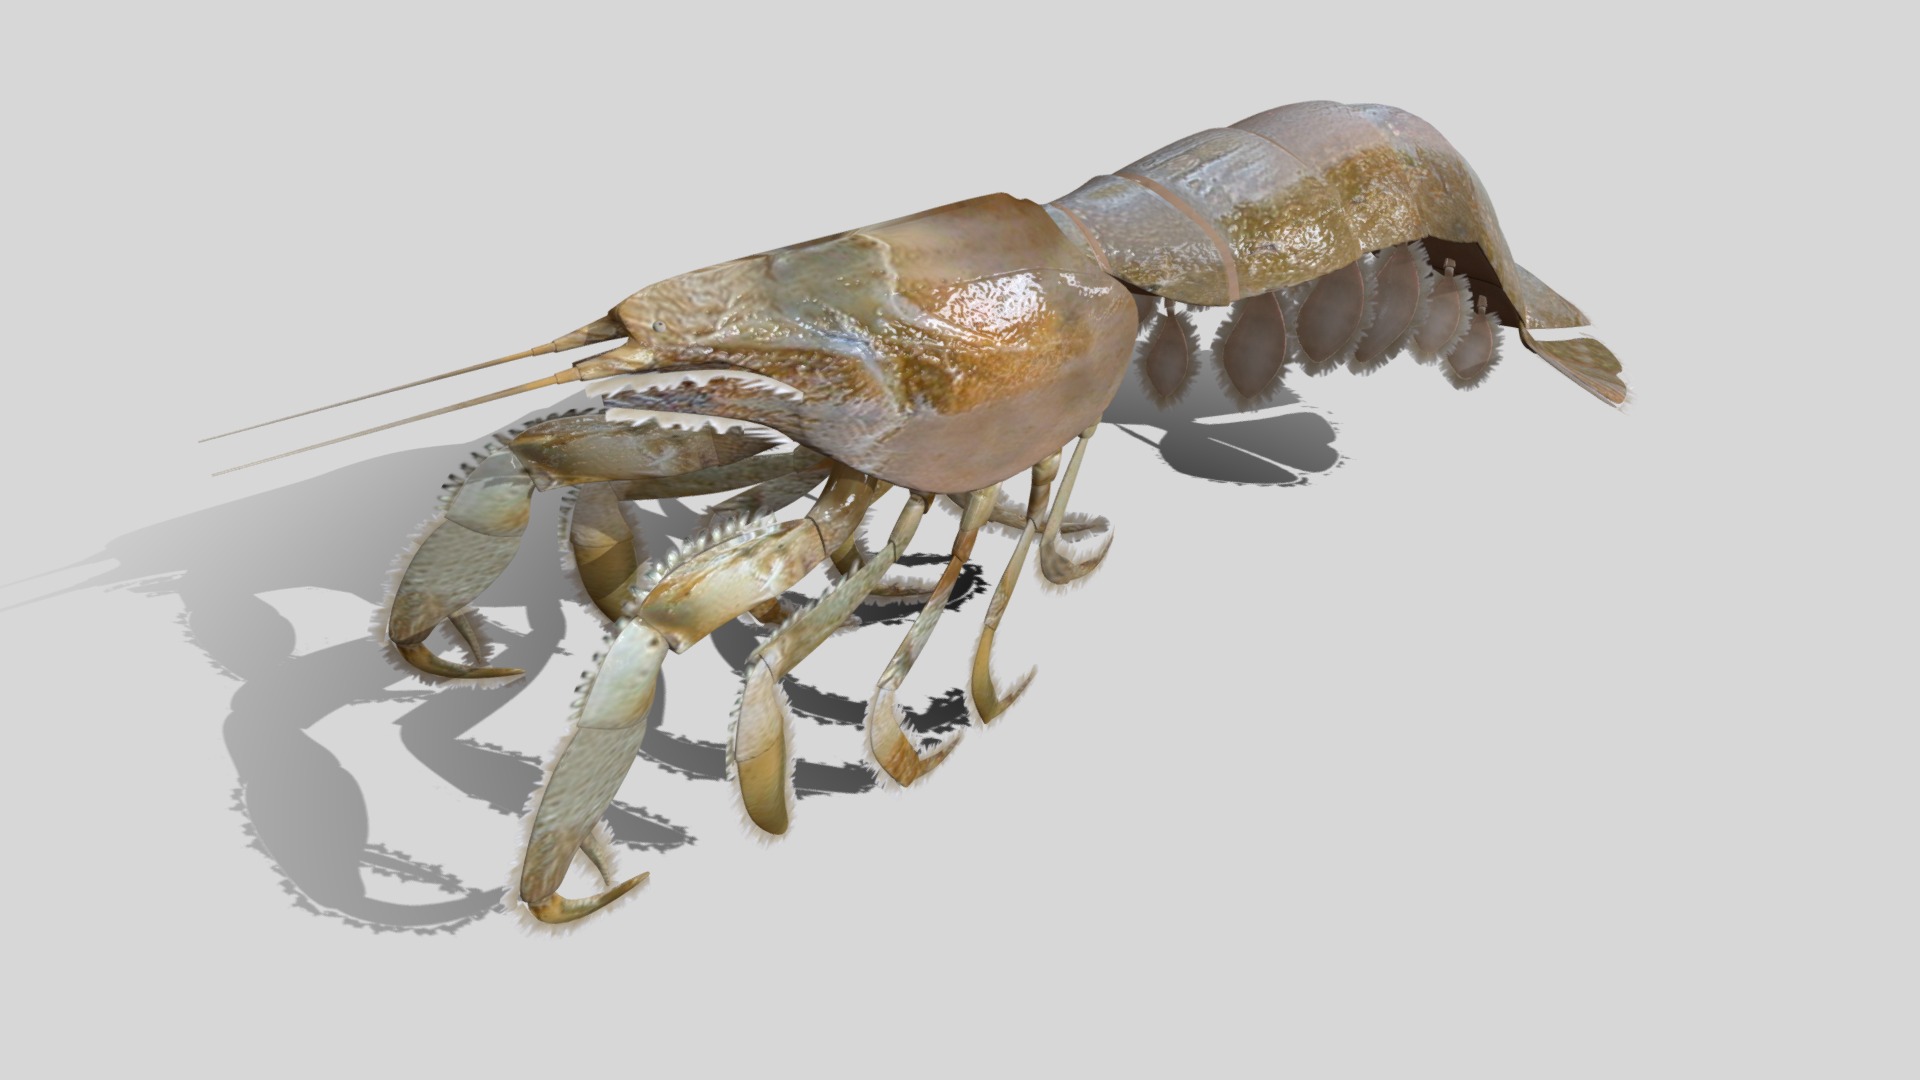 3D model Laomediidae Shrimp Prawn - This is a 3D model of the Laomediidae Shrimp Prawn. The 3D model is about a close-up of a bug.